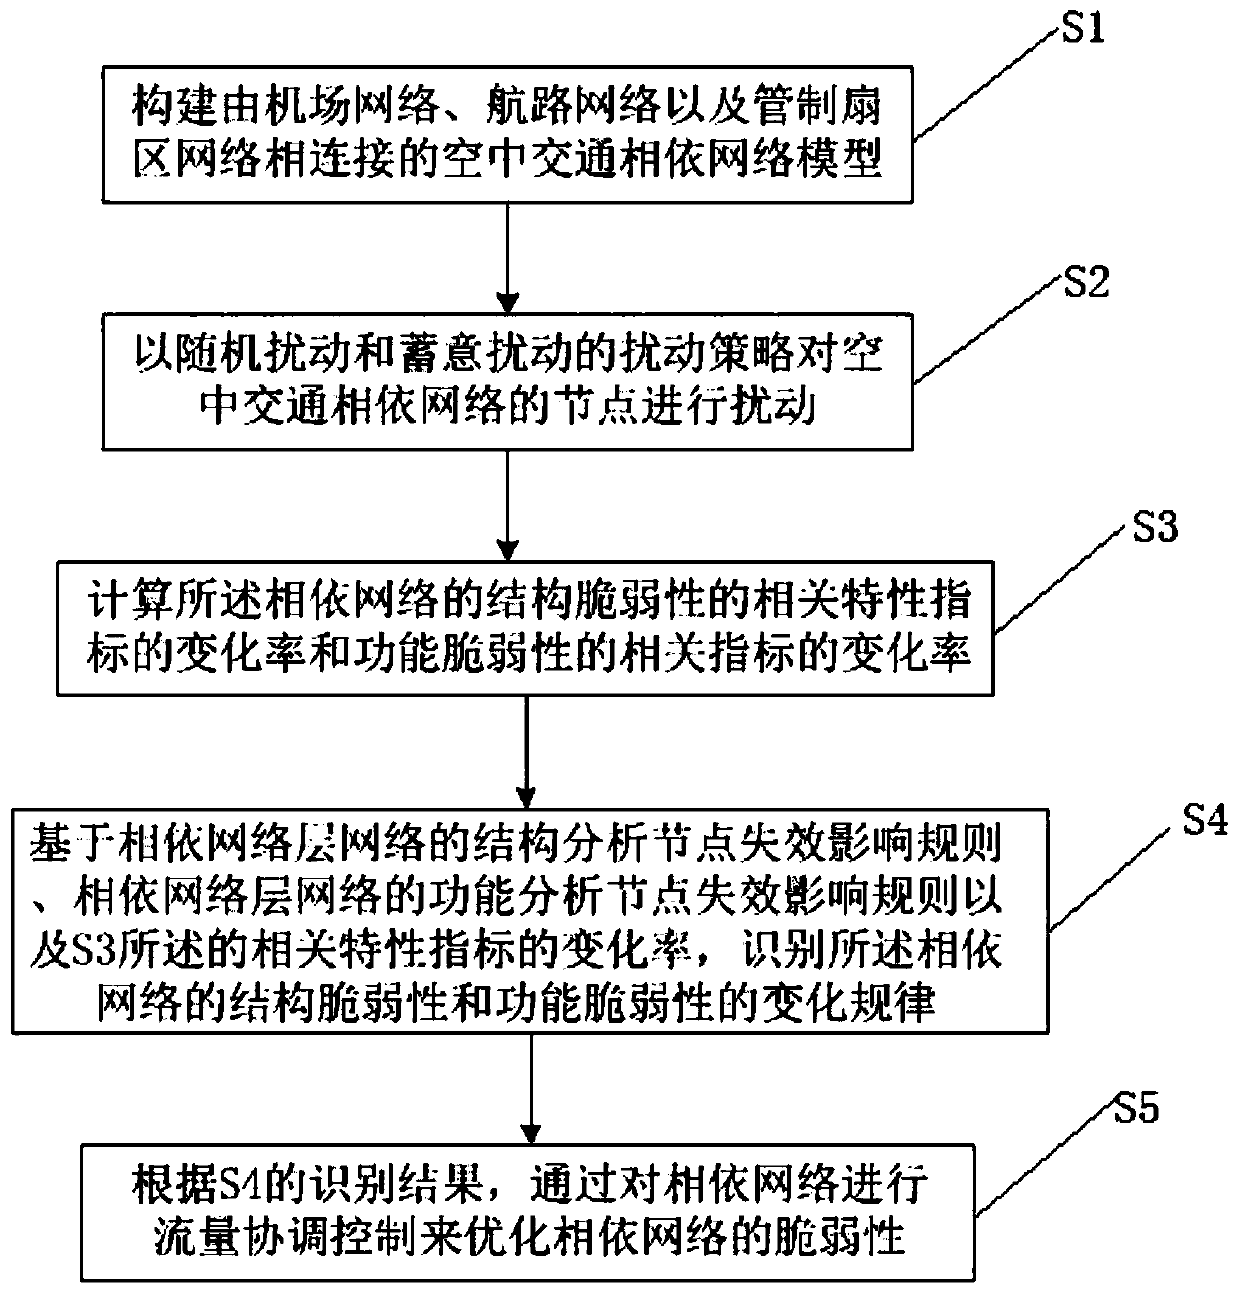 Air traffic dependent network vulnerability identification and control method and system